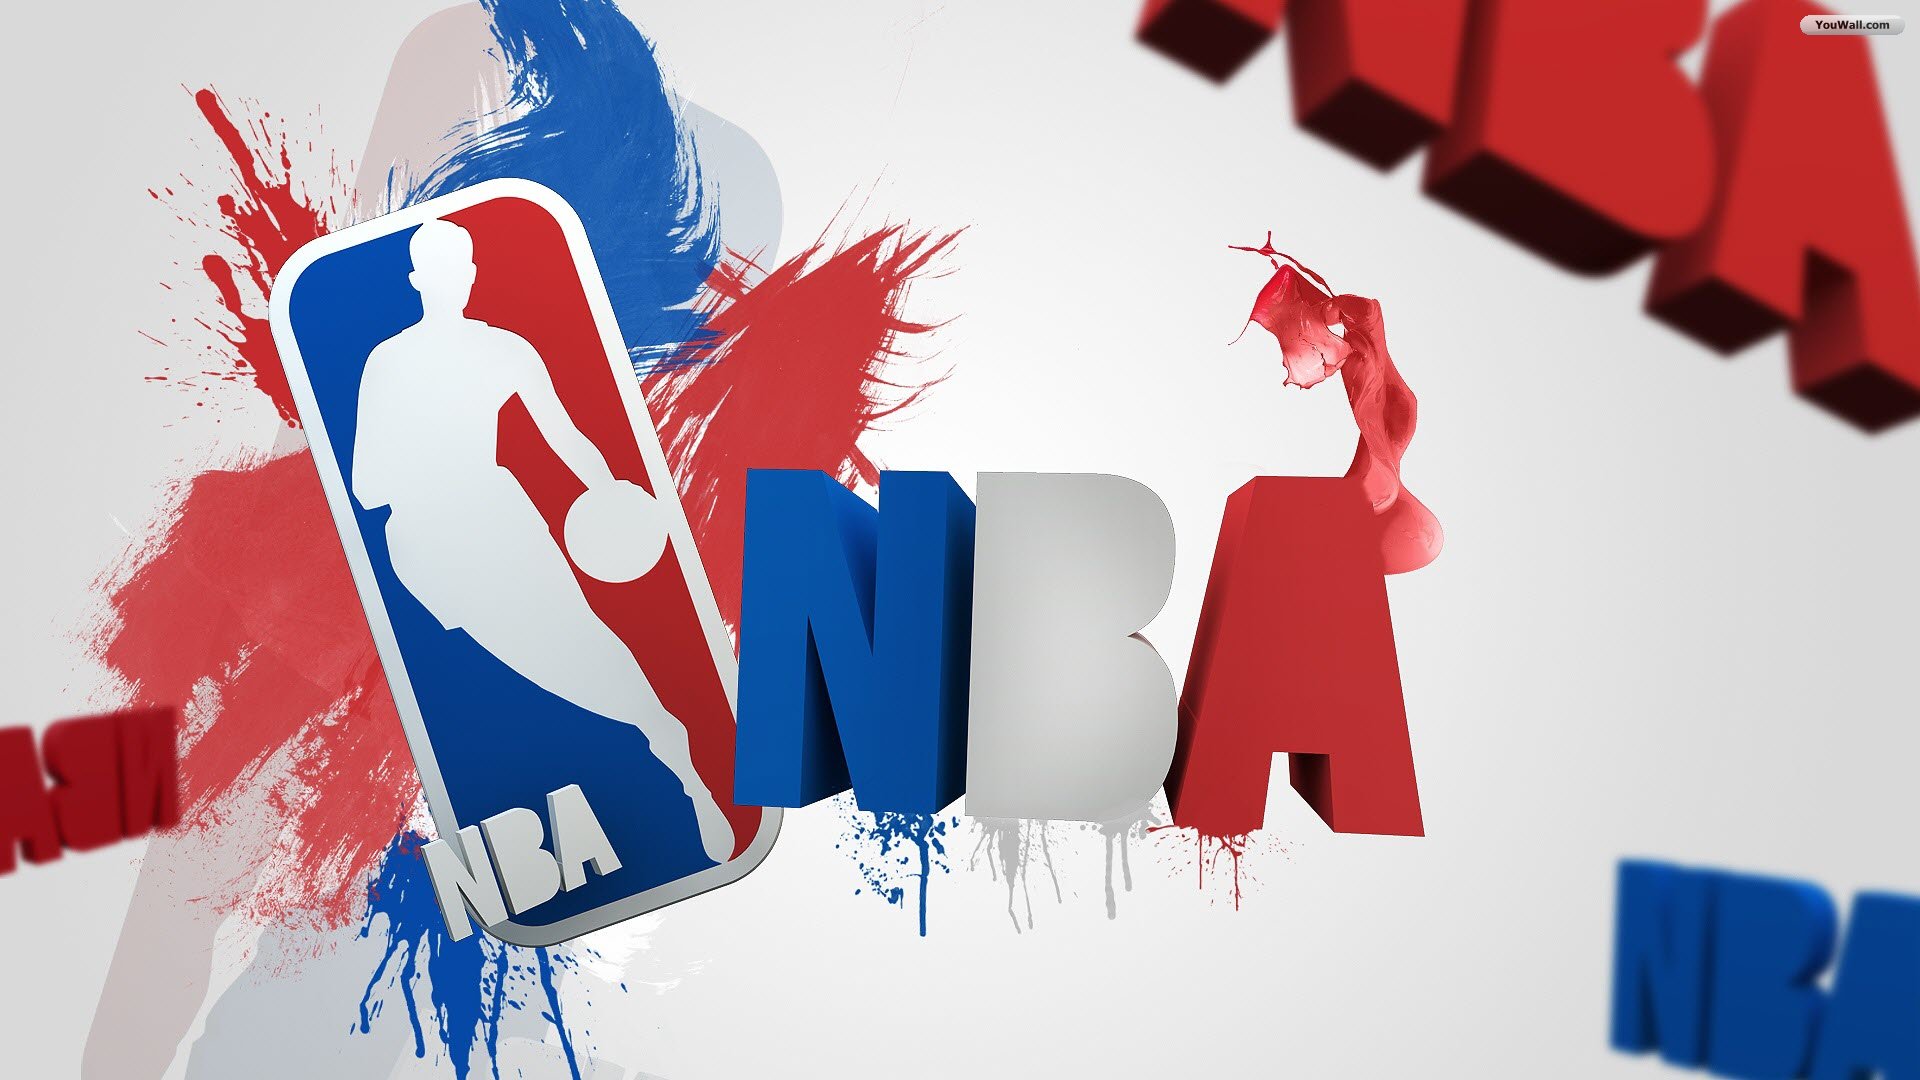 wallpaper background cool wallpapers nba 1920x1080